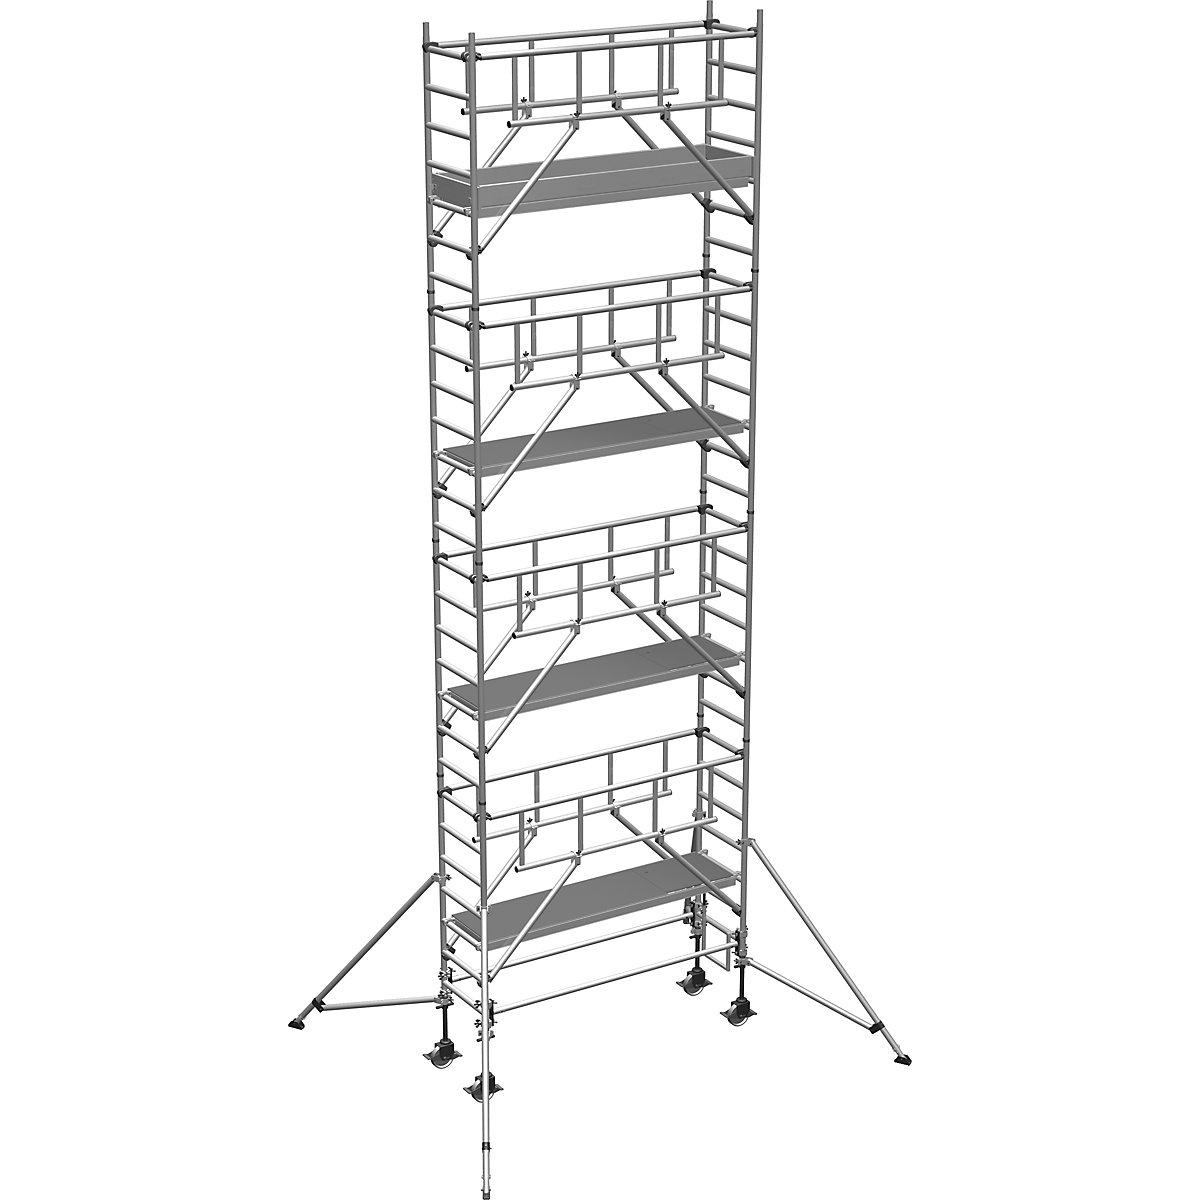 S-PLUS mobile access tower – ZARGES, platform 1.80 x 0.60 m, working height 9.25 m-6